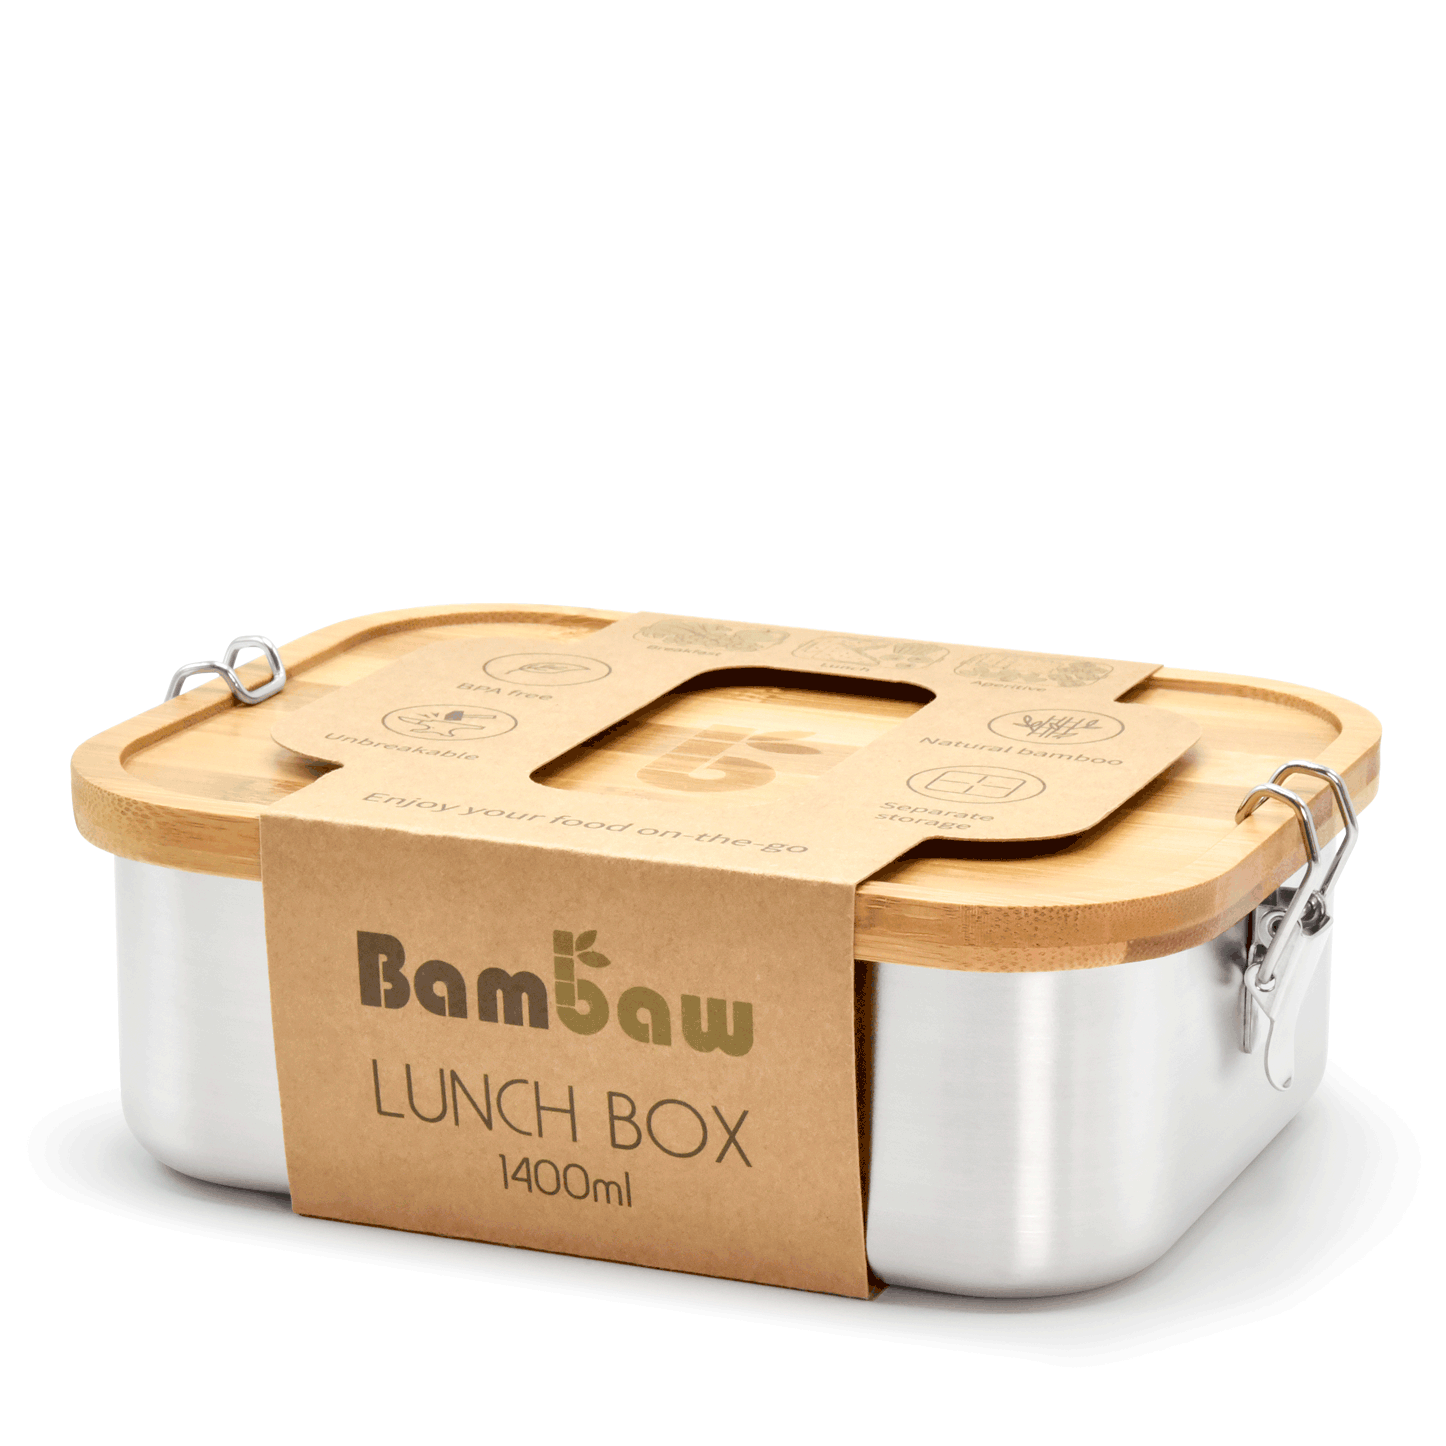 Bambaw-Lunchbox-PNG (44)_1